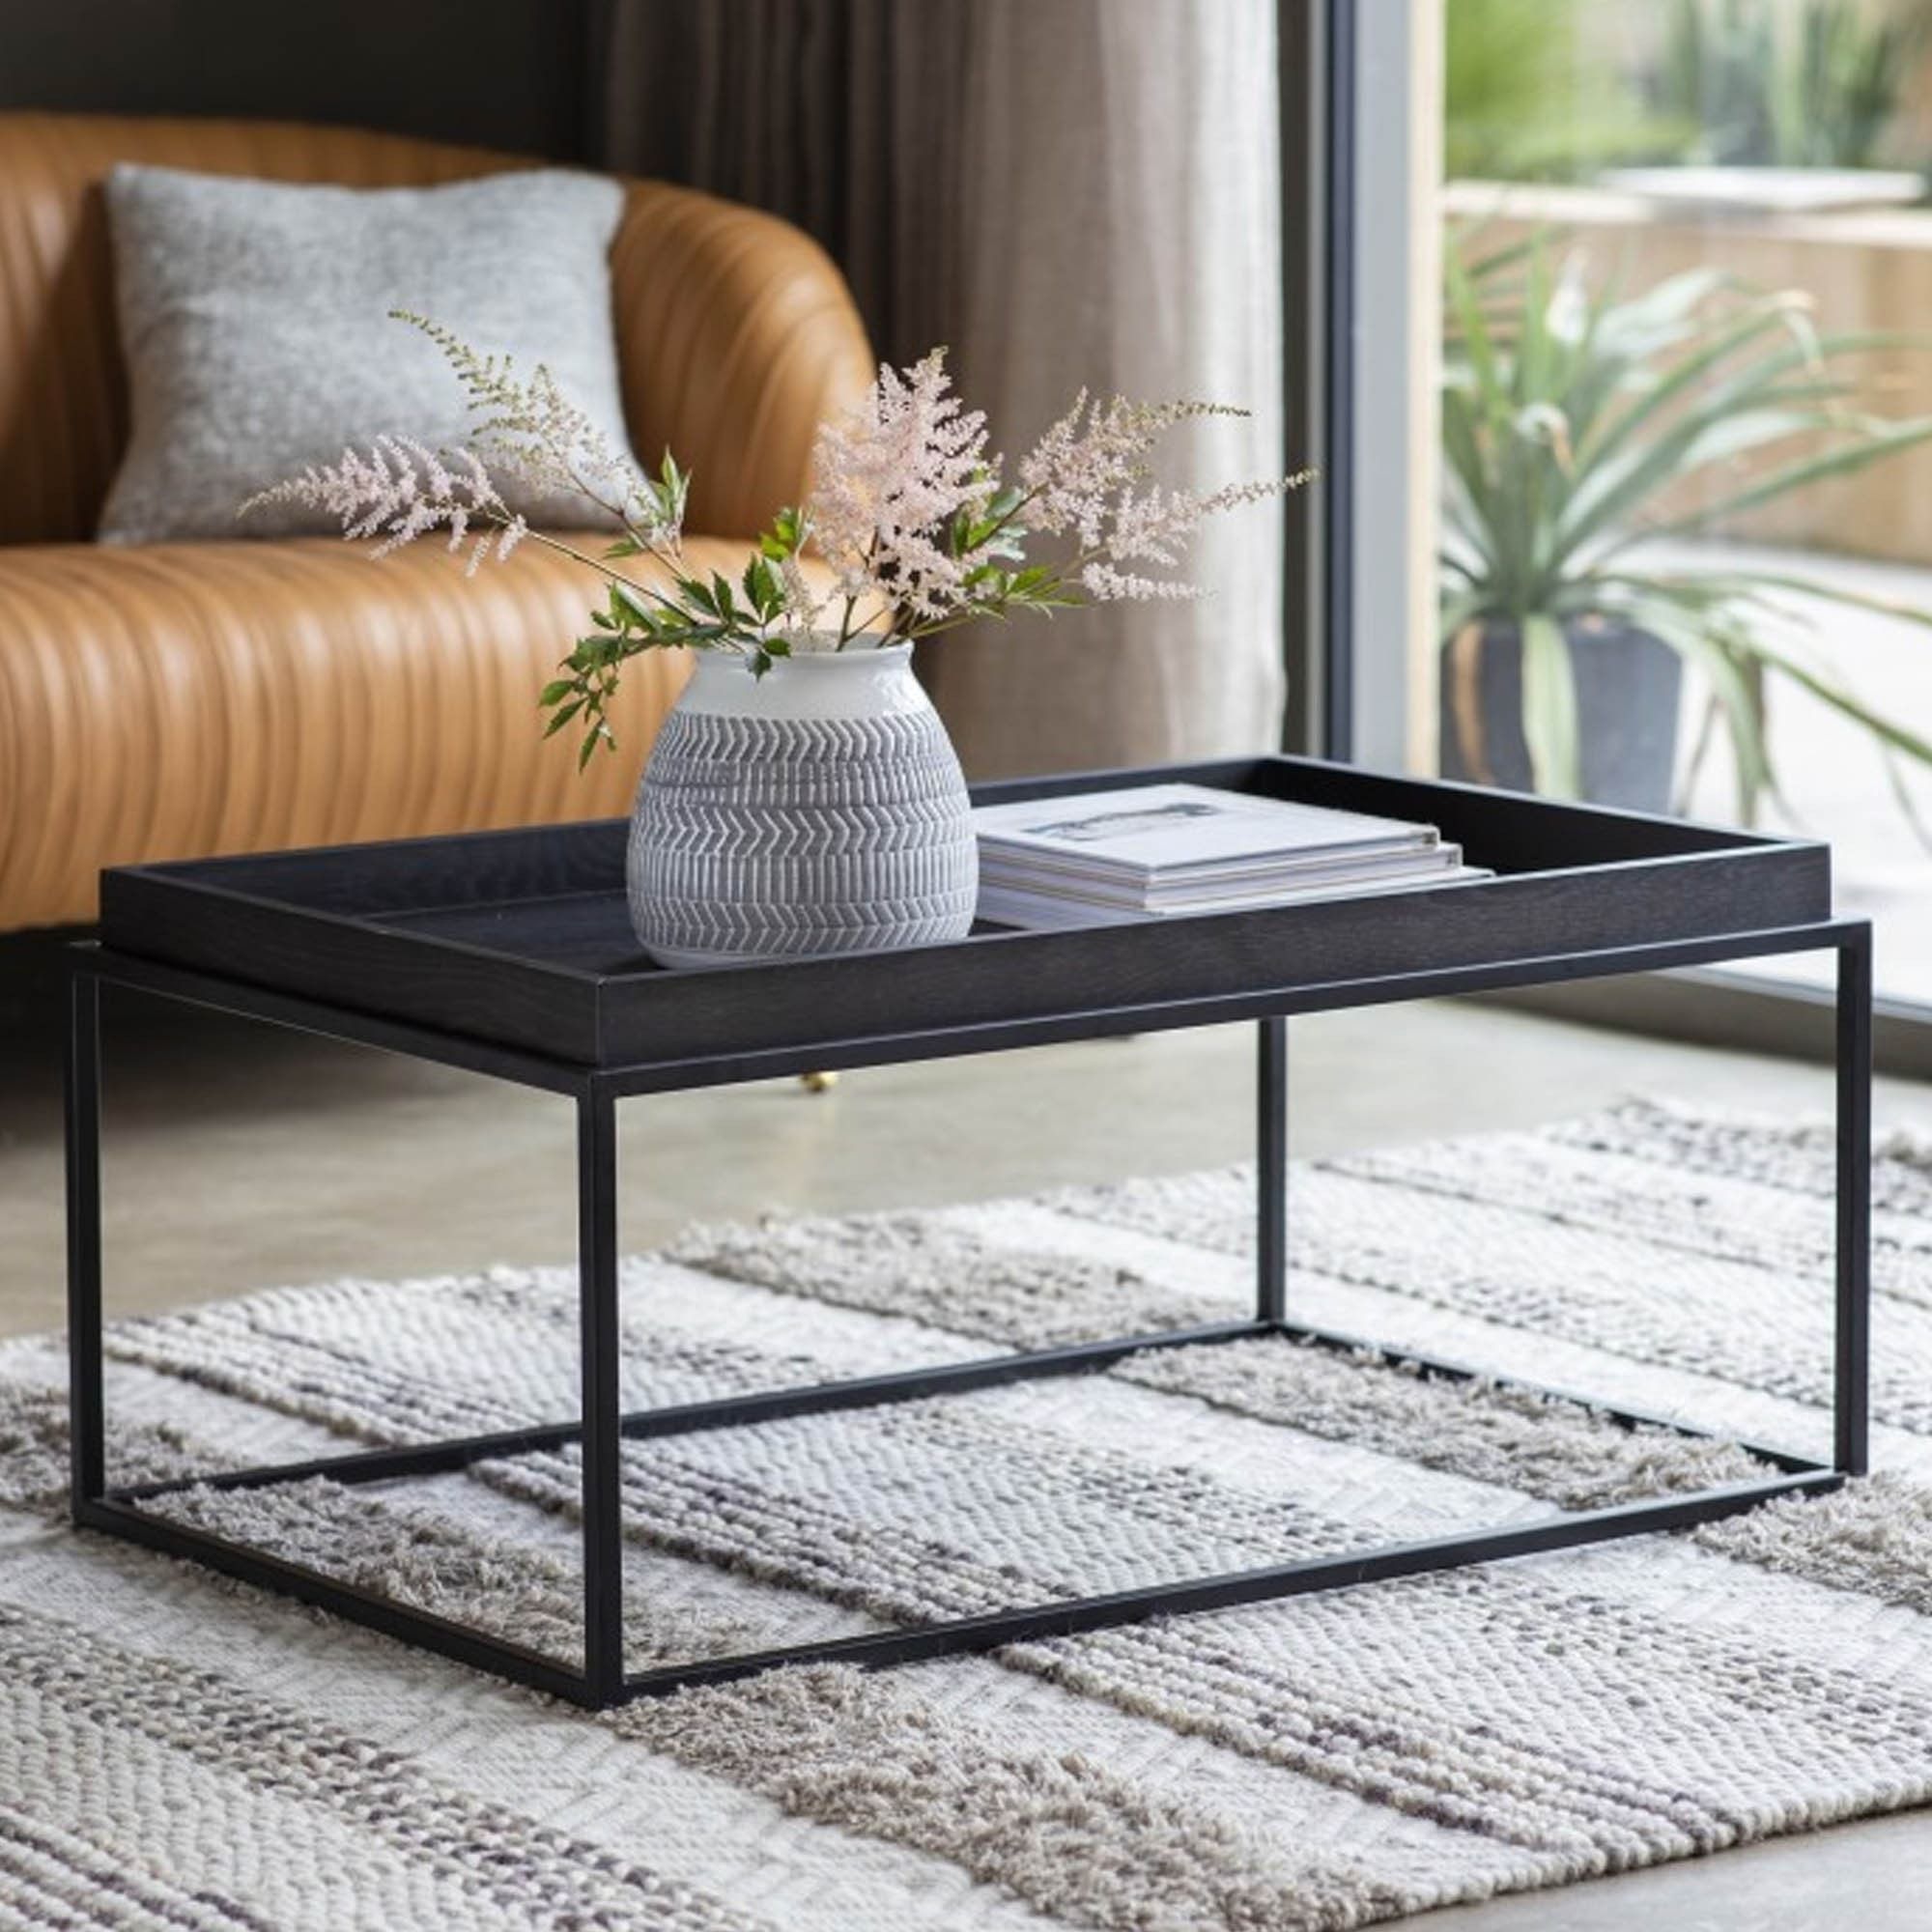 Forden Tray Coffee Table Black | Modern Coffee Table | Industrial Pertaining To Coffee Tables With Trays (View 13 of 20)